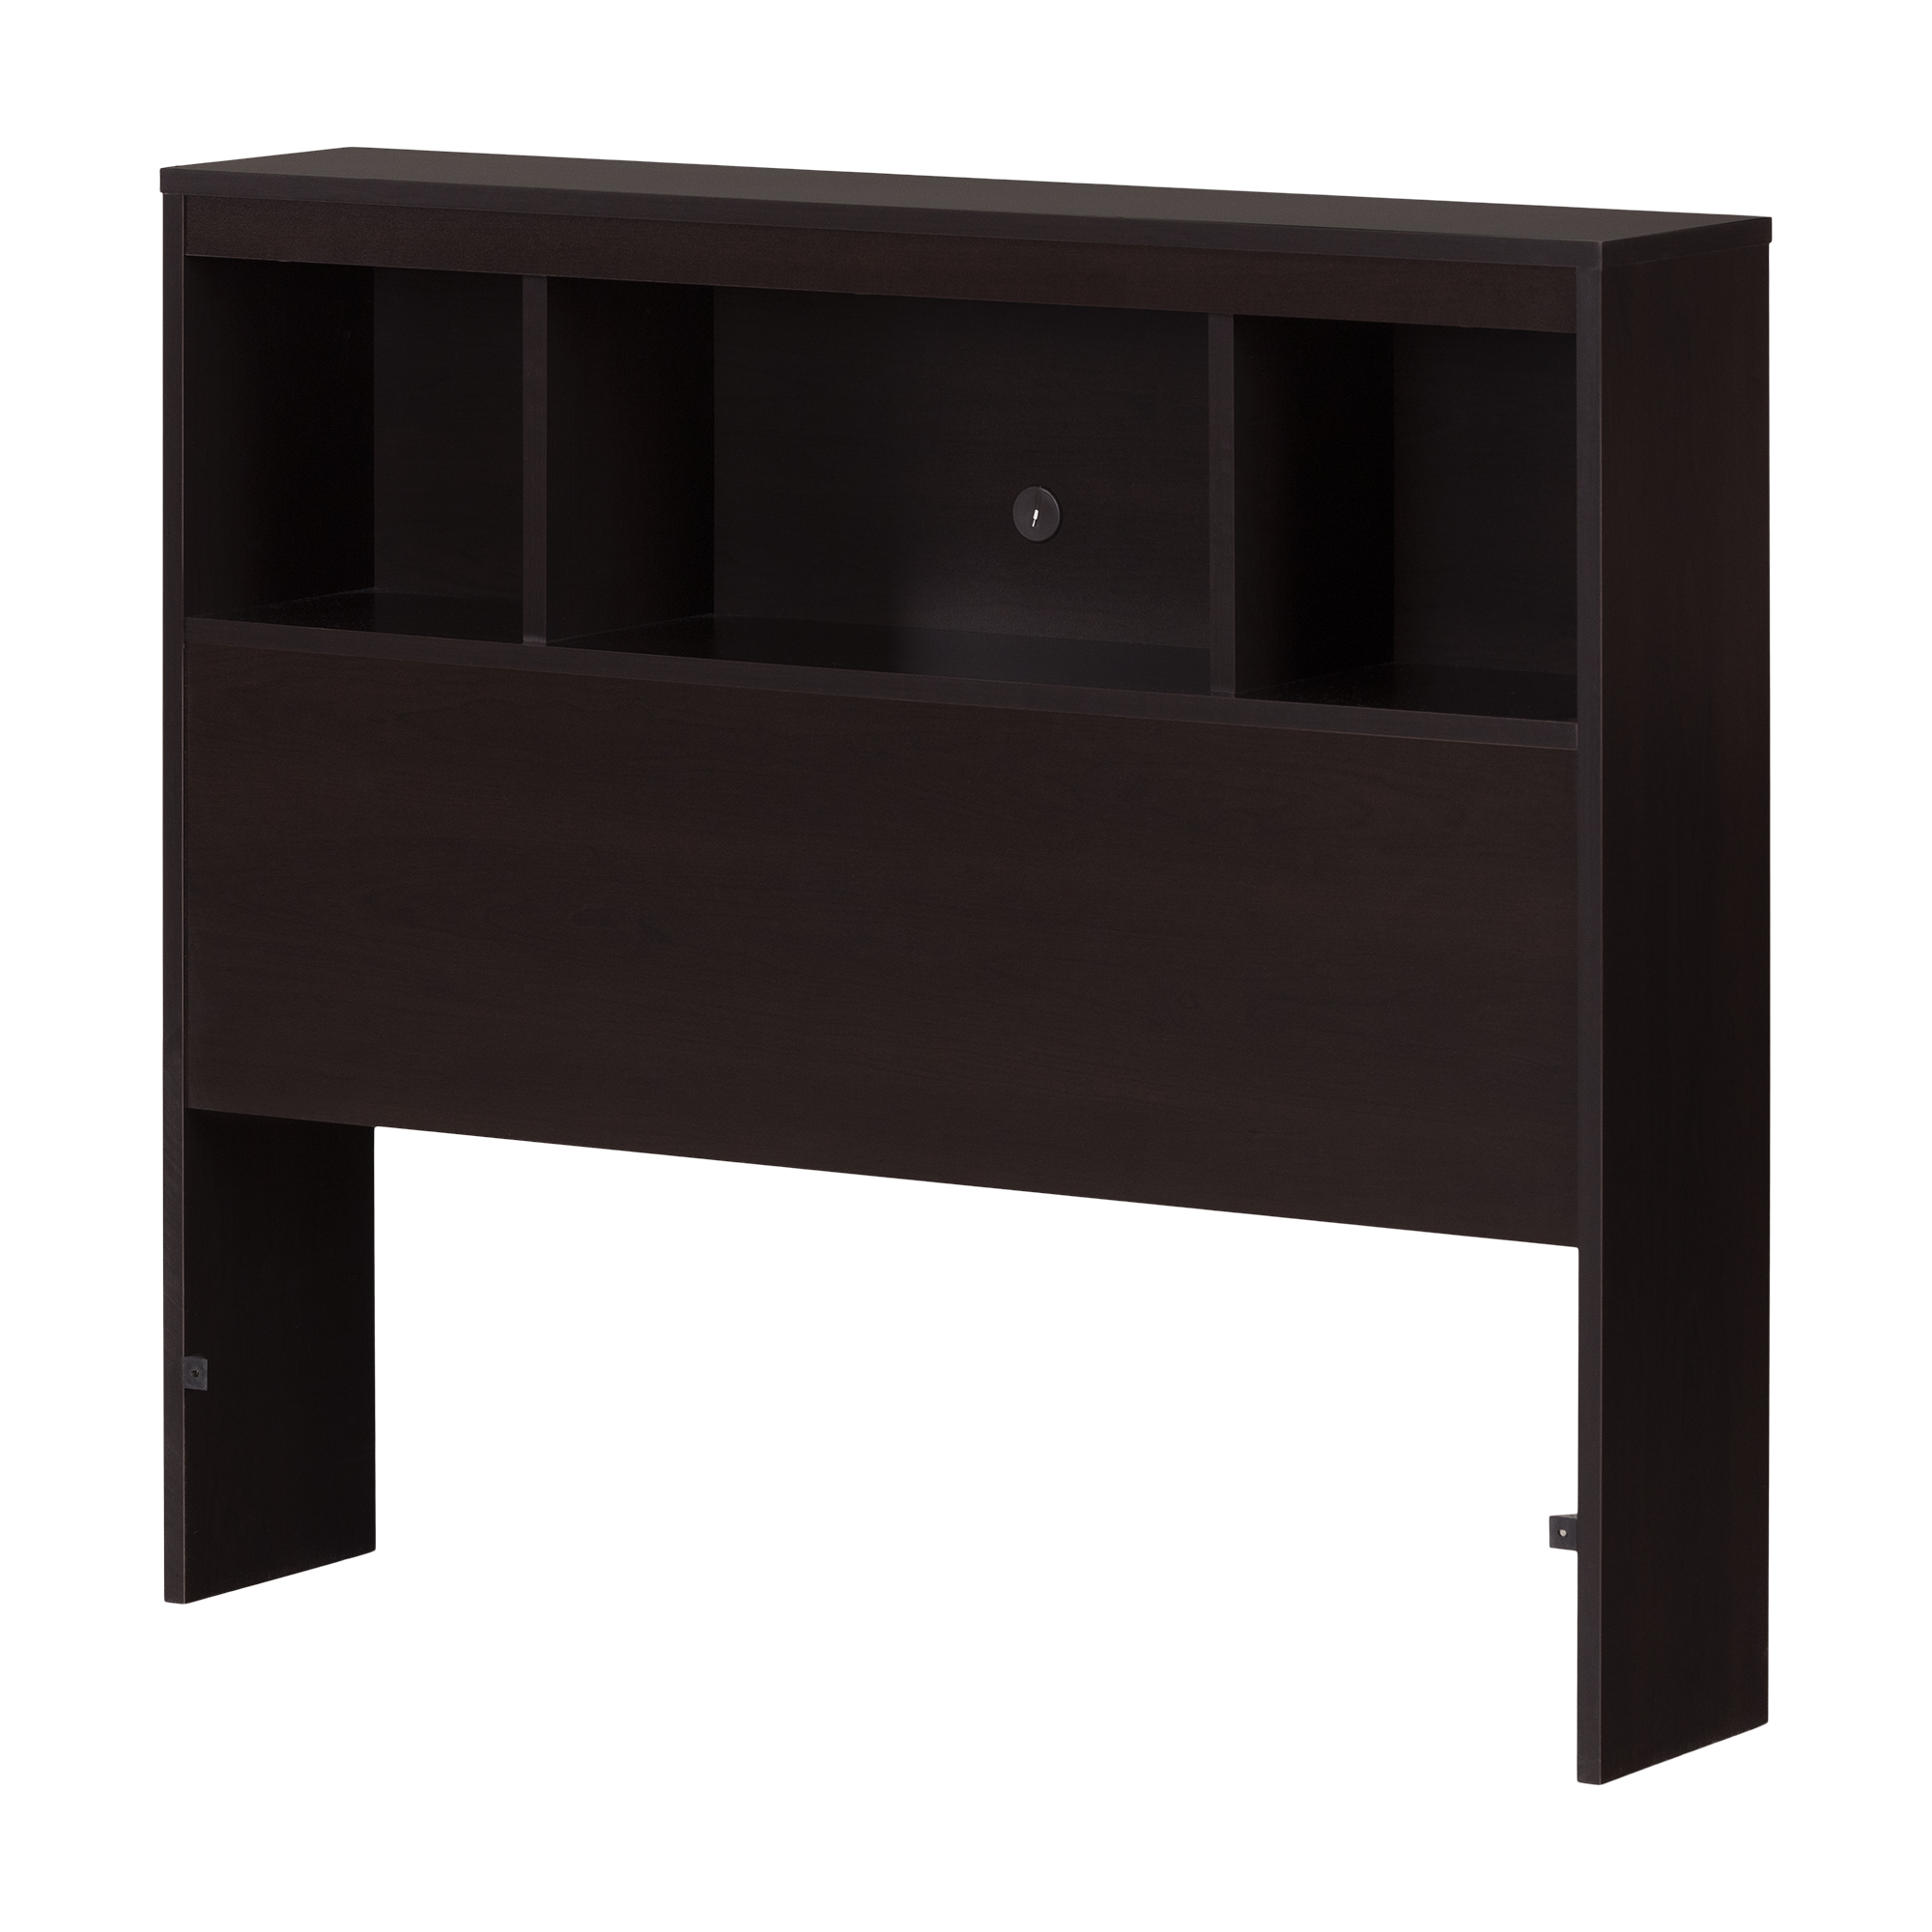 South Shore Spark Kid's Bookcase Headboard, Twin, Chocolate - image 1 of 10